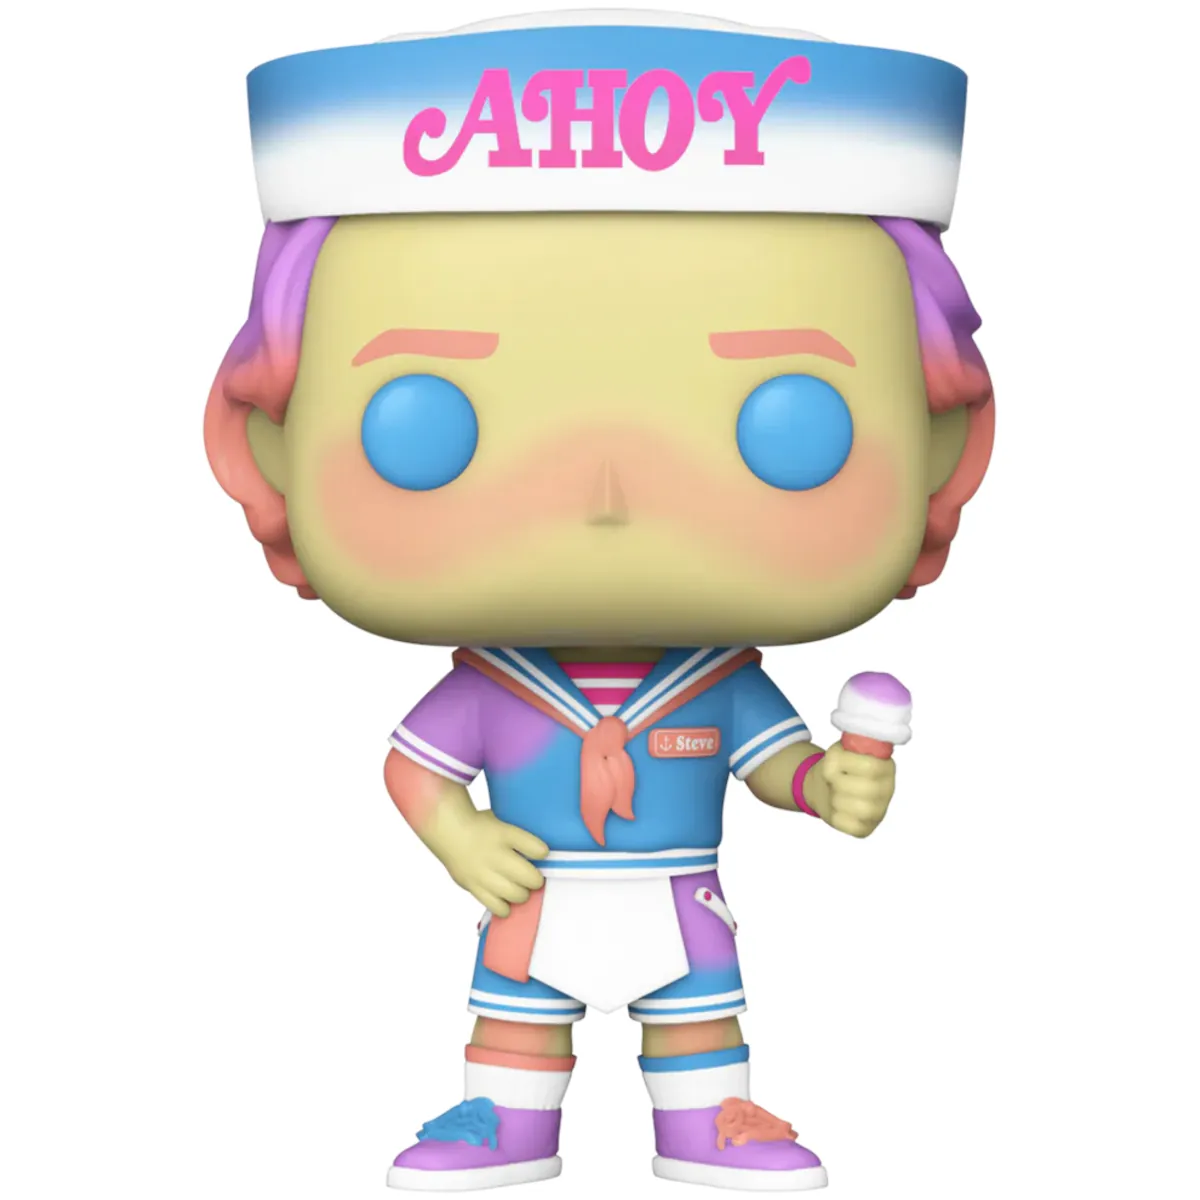 79998 Funko Pop! Television - Stranger Things - Steve (Scoops Ahoy) Collectable Vinyl Figure